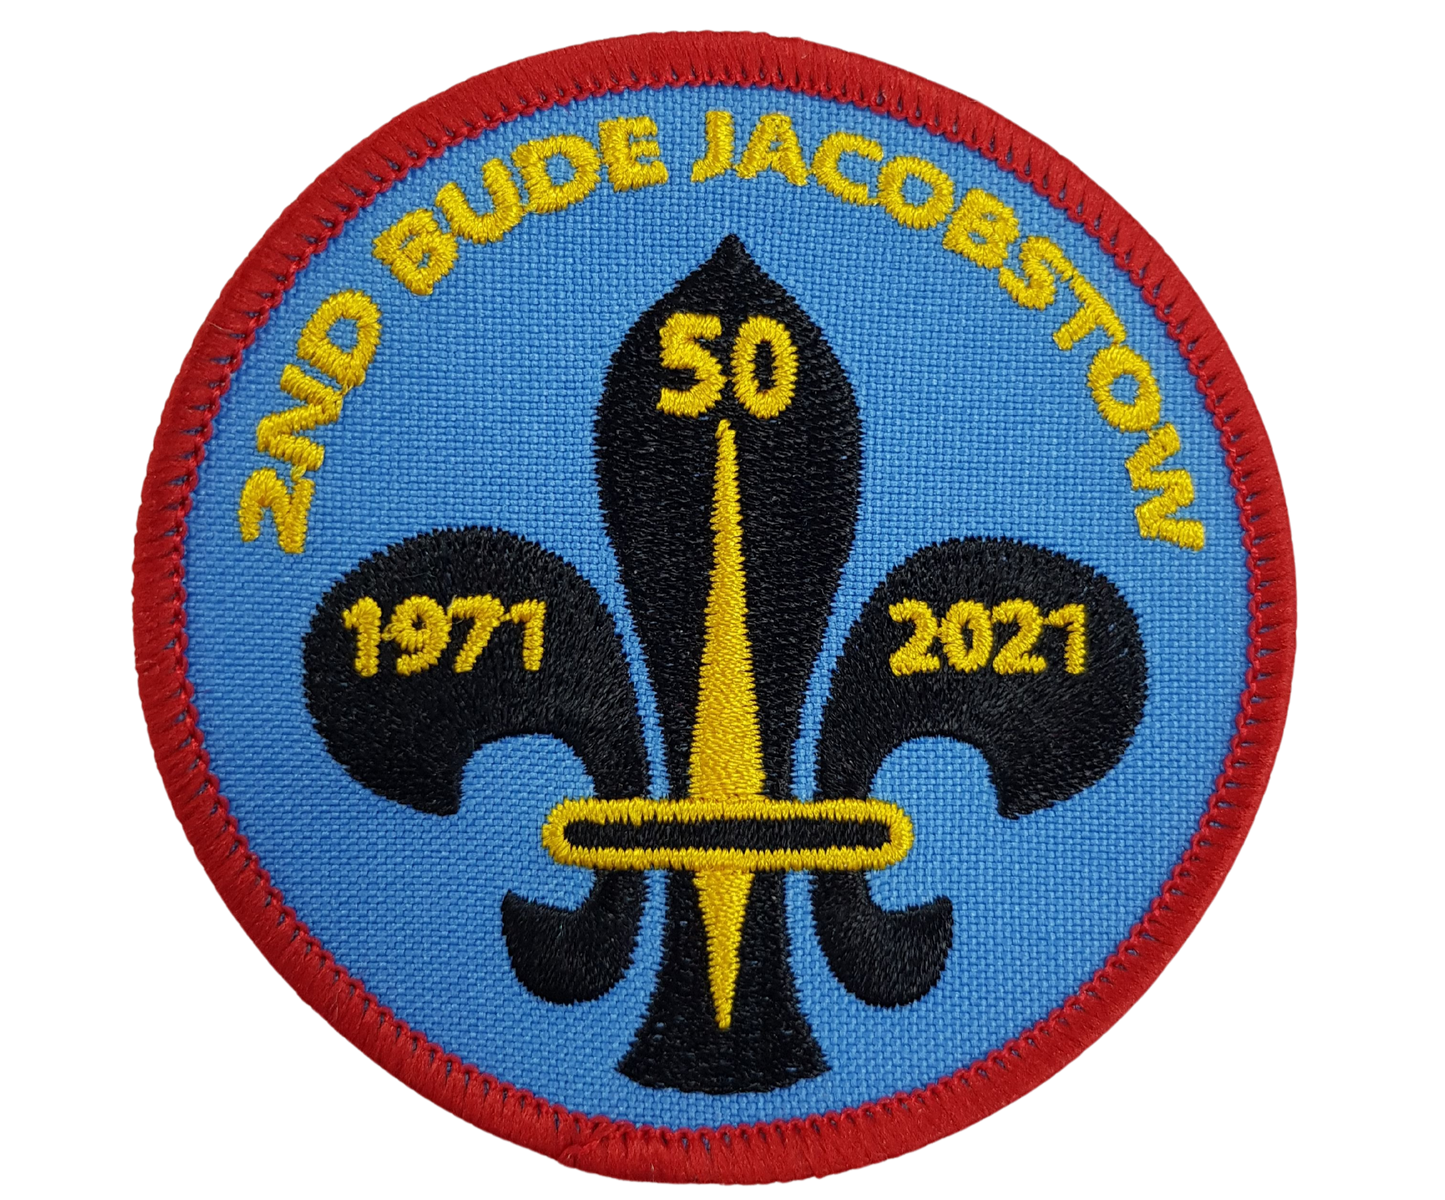 CLUB BADGES SCOUT GROUP BADGES - GIRL GUIDE BADGES BROWNIE BADGES - GROUP AND CLUB PATCHES - Lynendo Trade Store